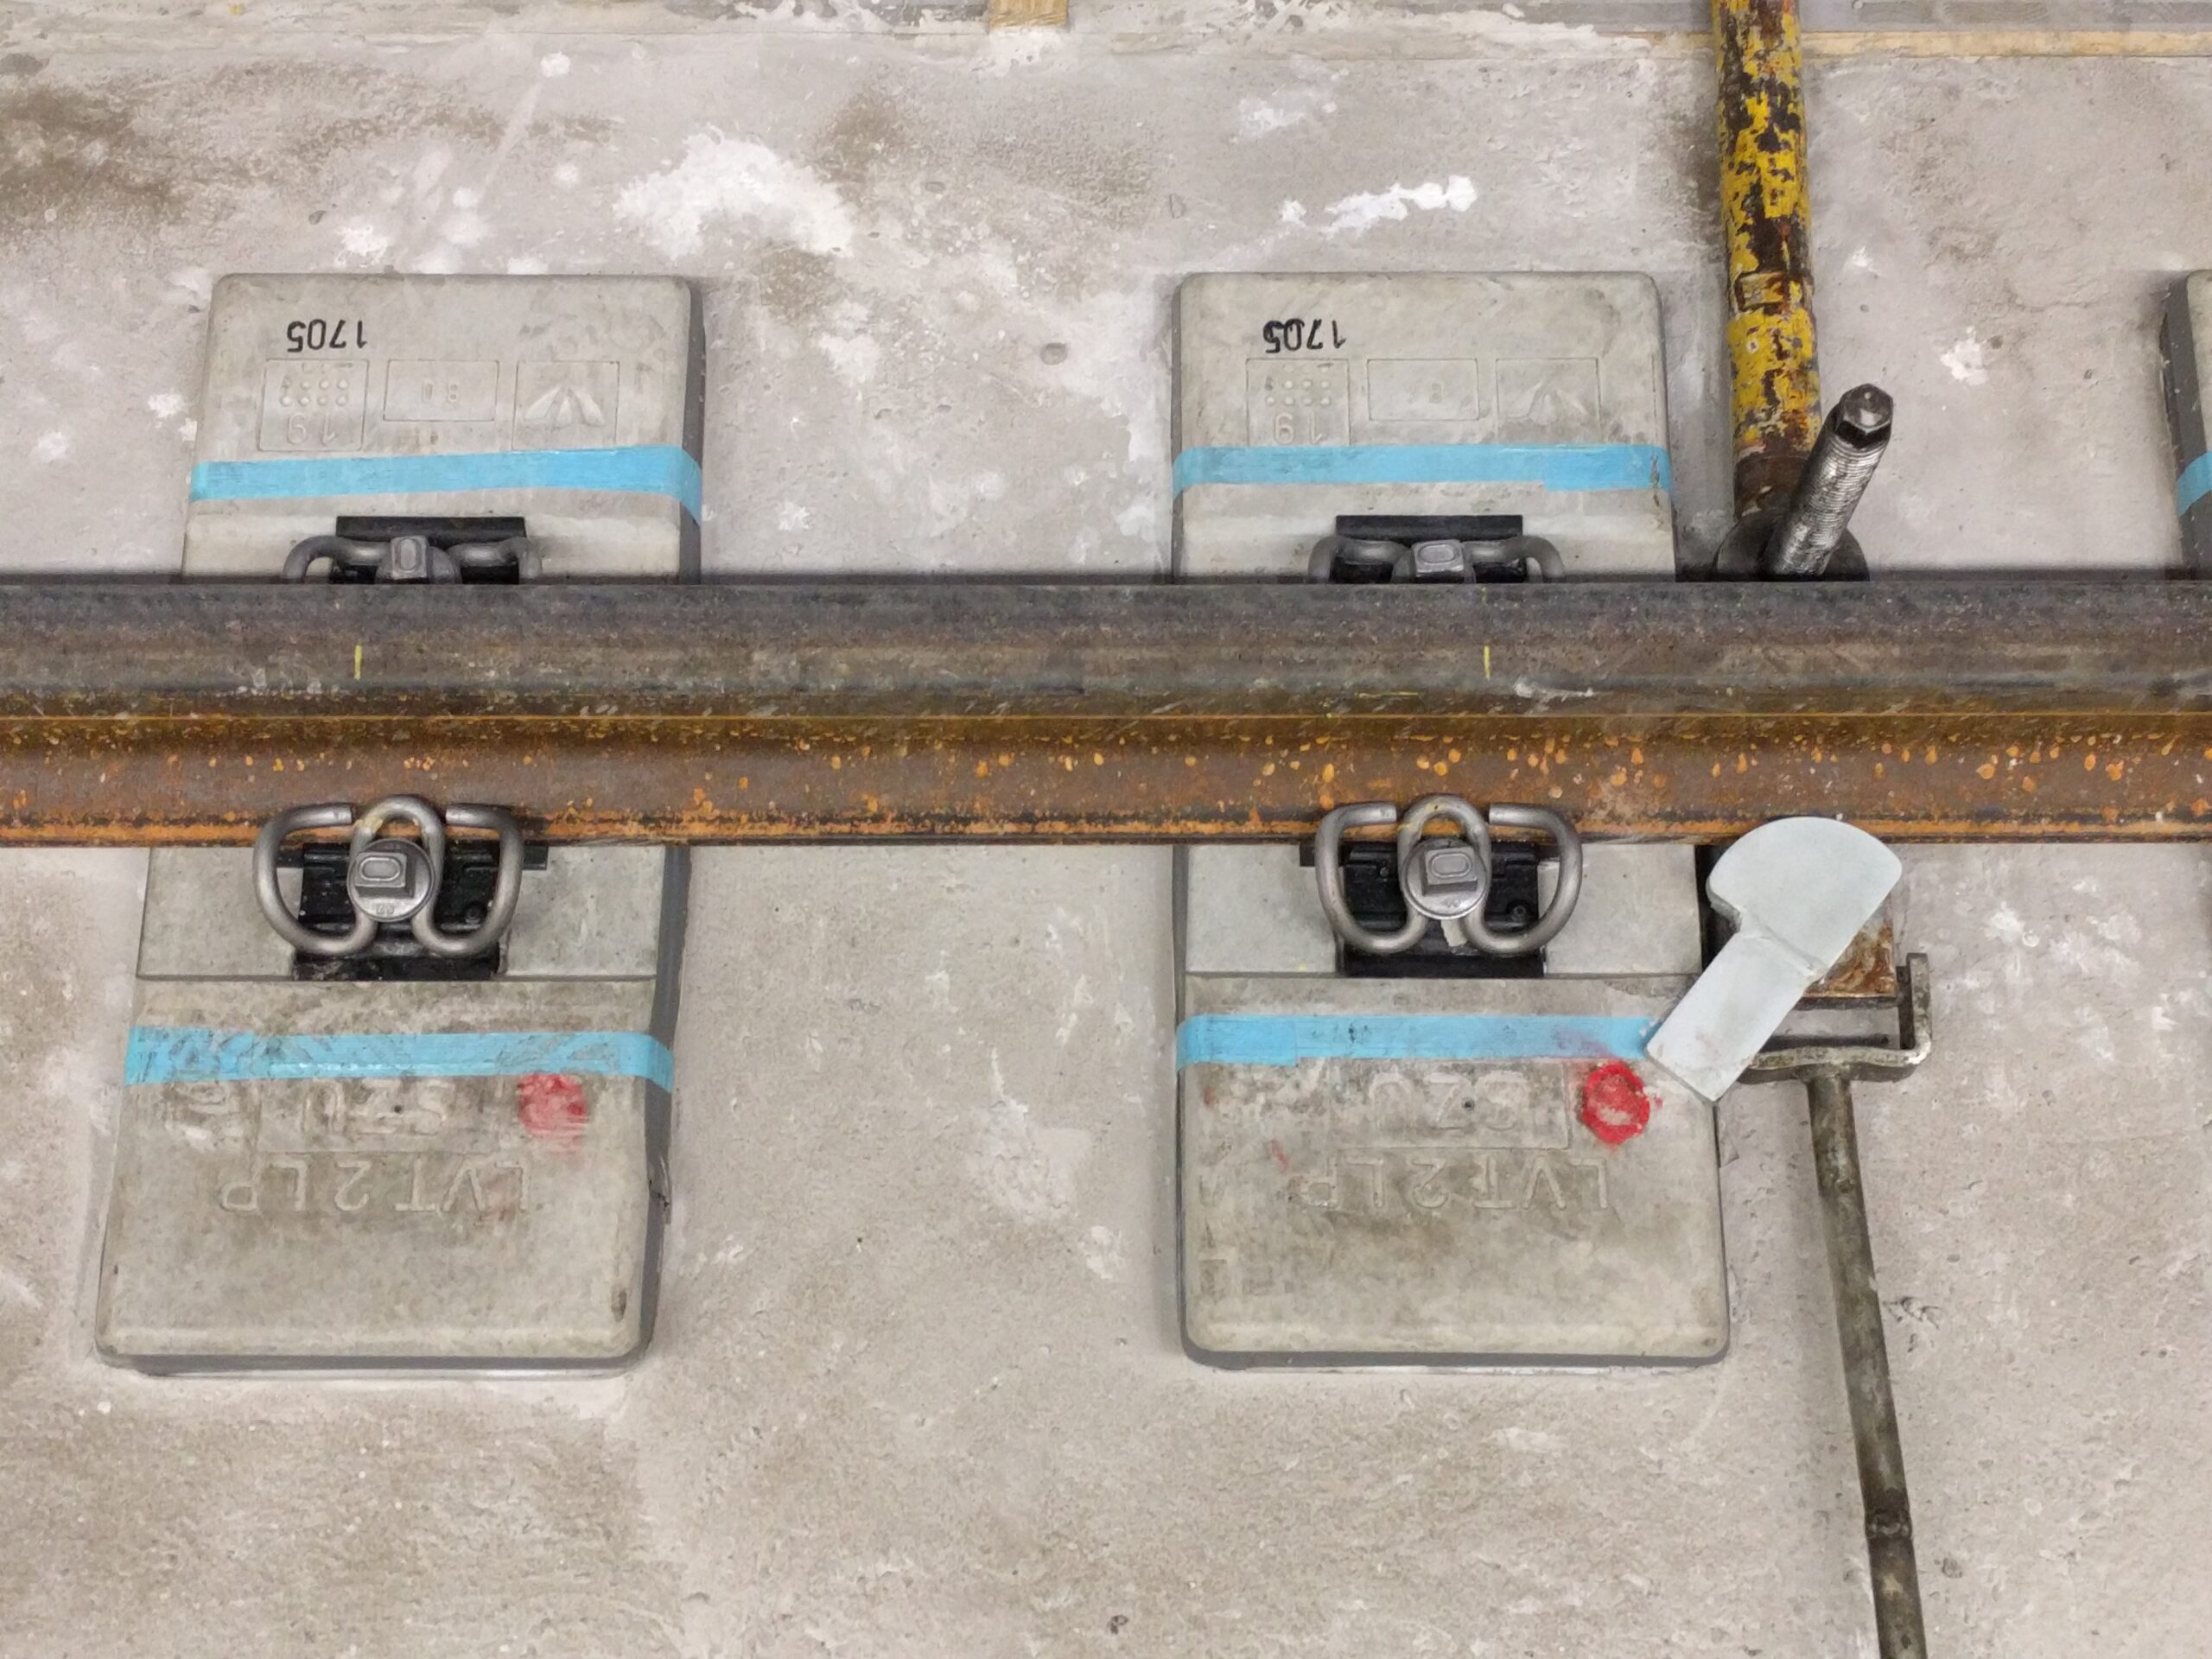 Concrete sleepers of Vigier's Low Vibration Track system